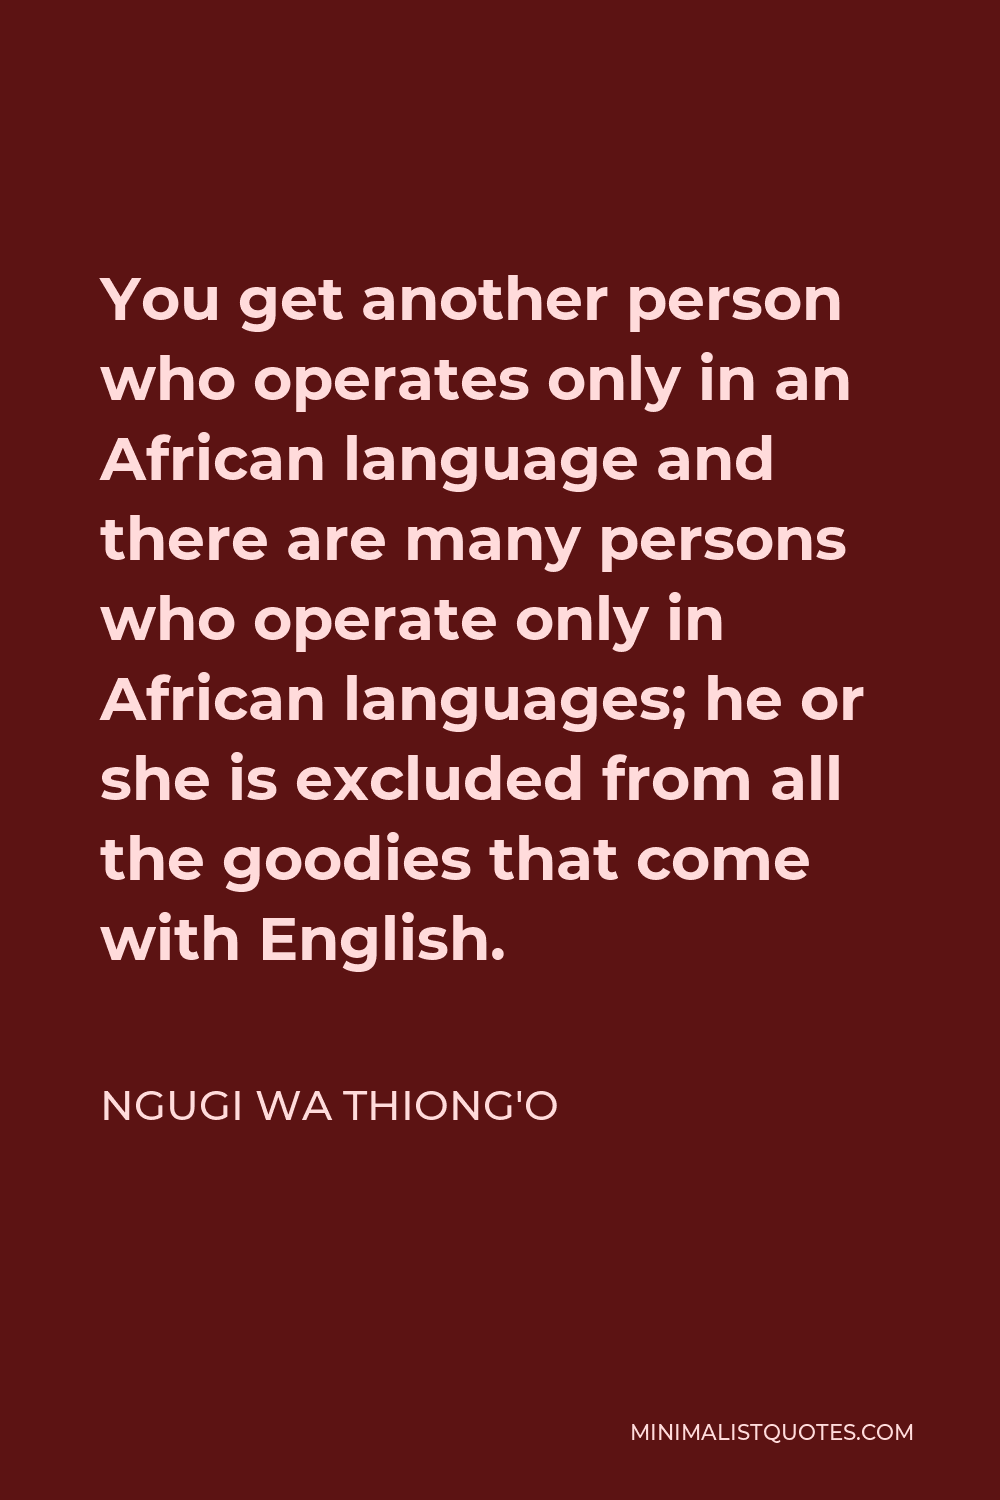 Ngugi wa Thiong'o Quote - You get another person who operates only in an African language and there are many persons who operate only in African languages; he or she is excluded from all the goodies that come with English.